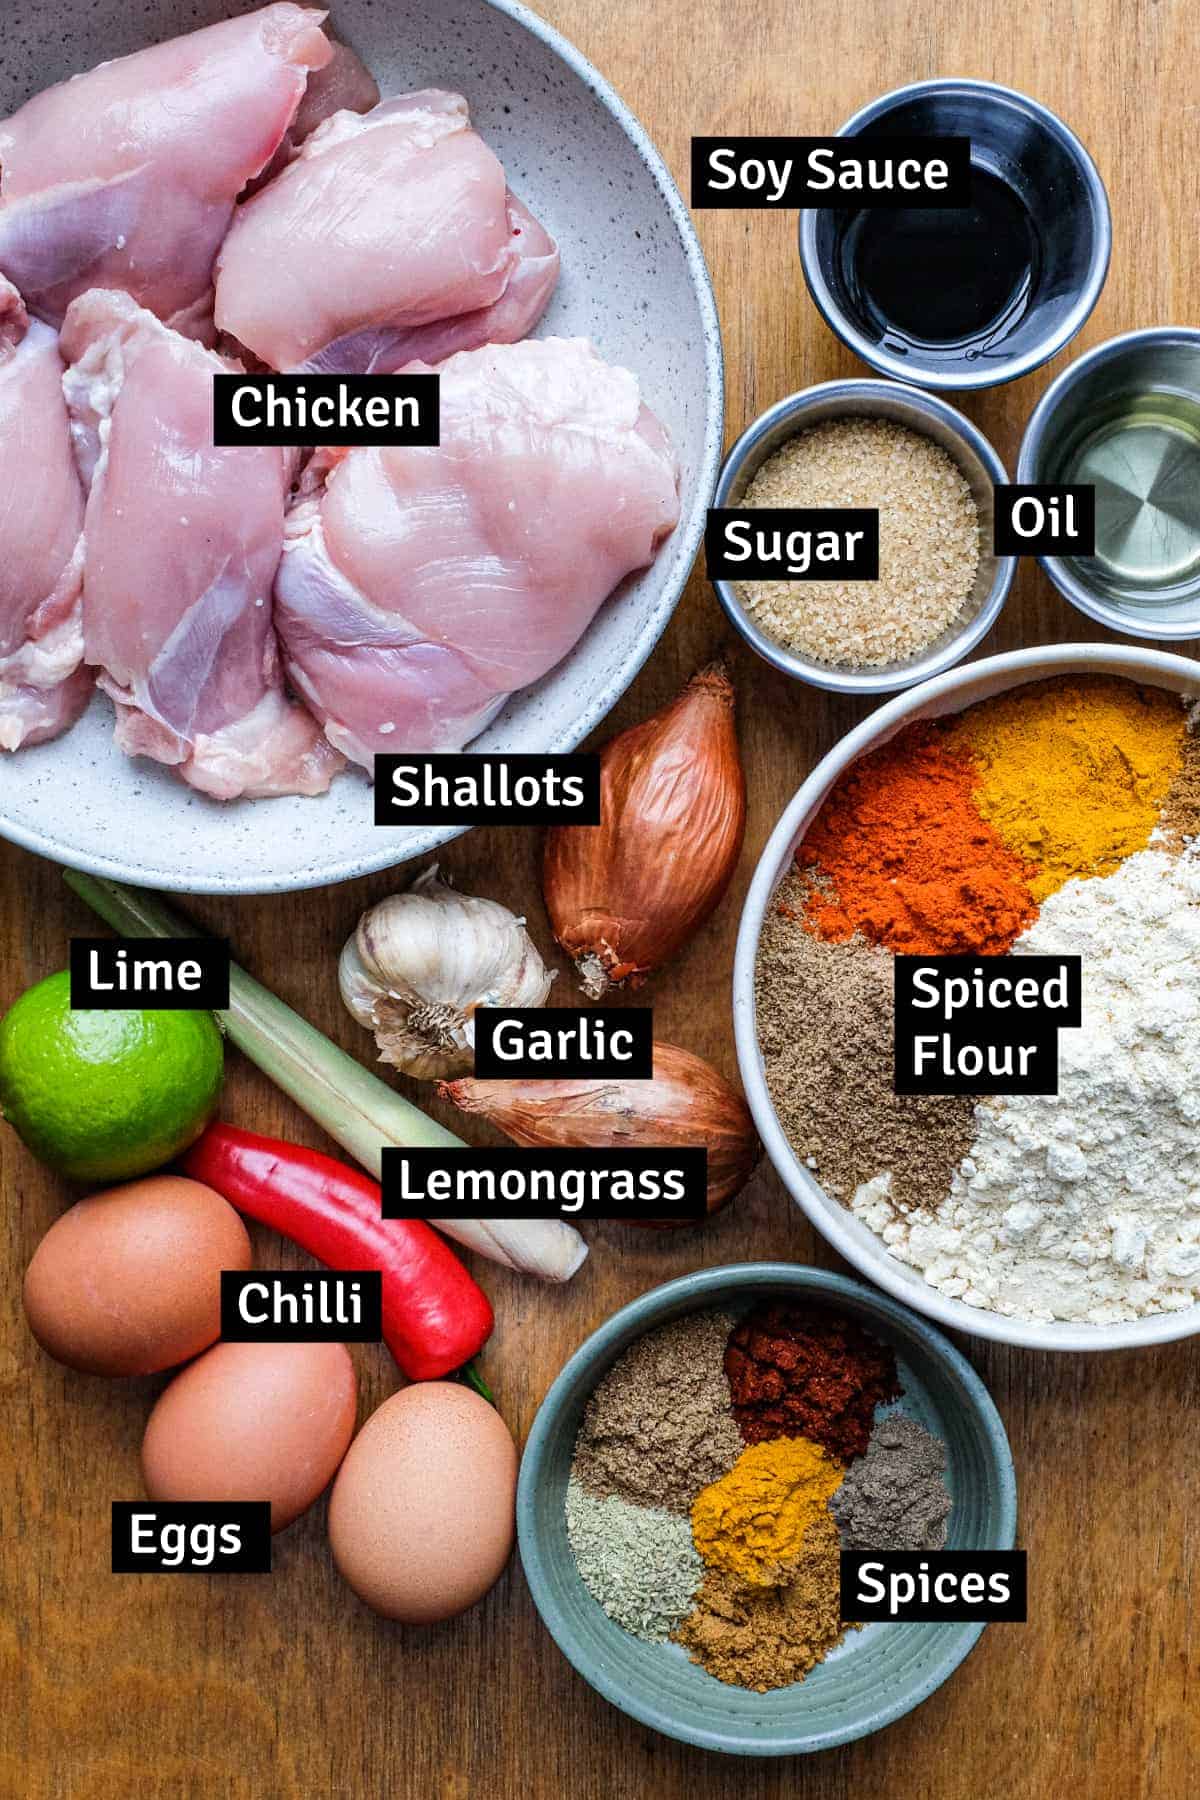 The ingredients for Malaysian fried chicken all laid out on a wooden surface.